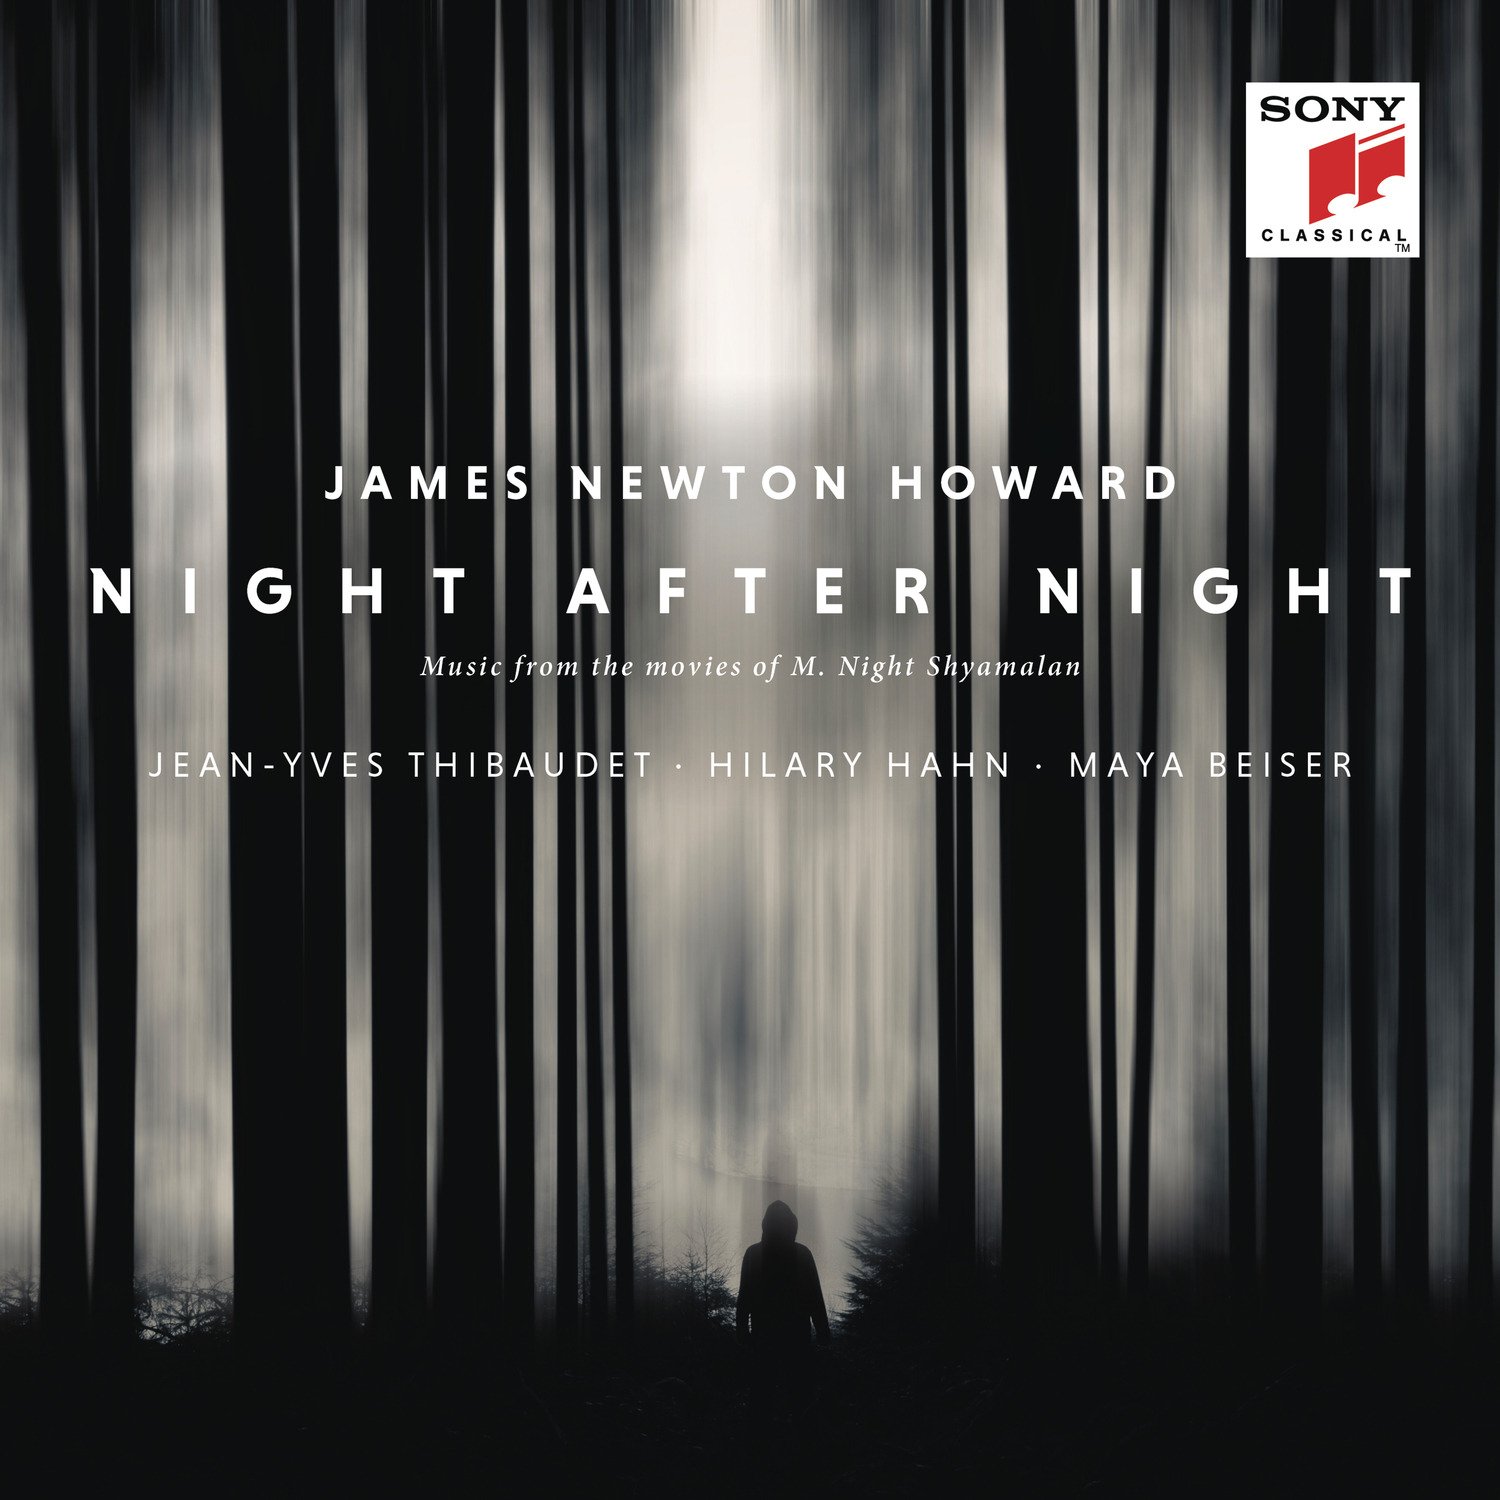 CD Shop - HOWARD, JAMES NEWTON & JEAN-YVES THIBAUDET Night After Night (Music from the Movies of M. Night Shyamalan)